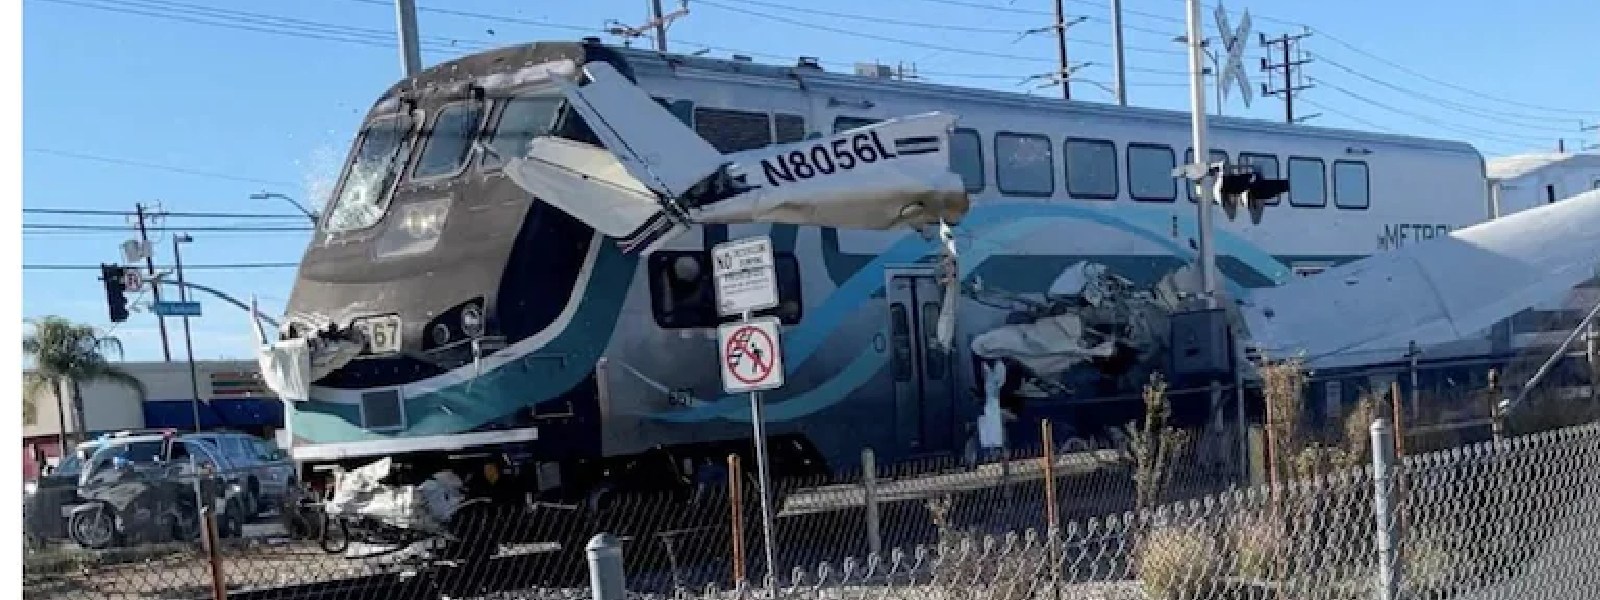 Plane hit by train after crash landing on railway tracks in California